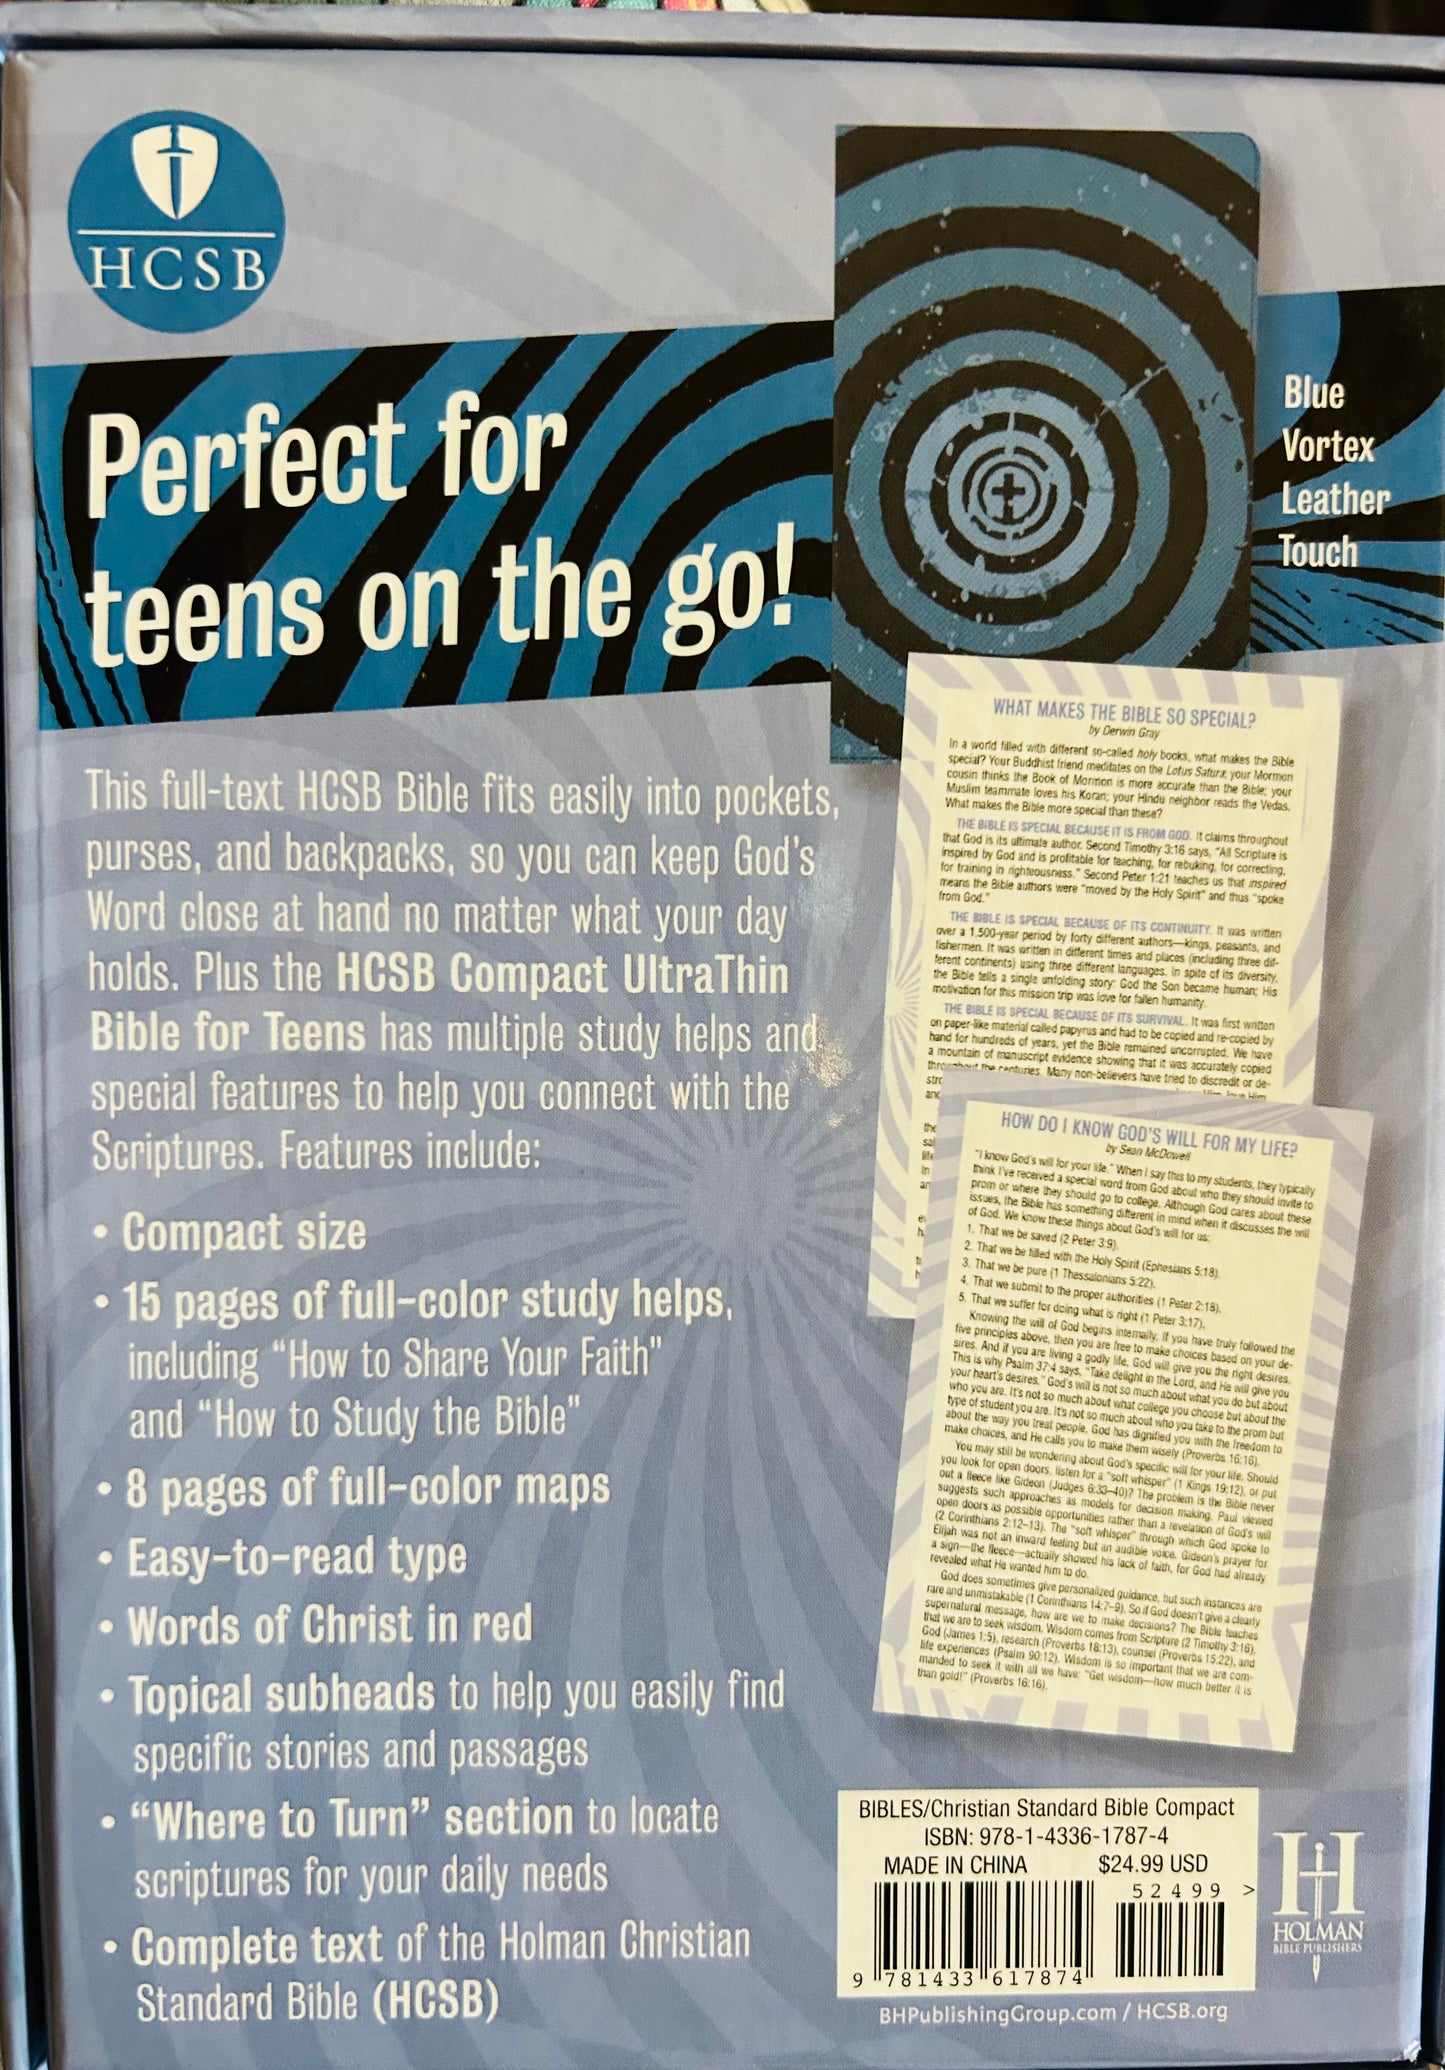 HCSB Compact Ultrathin Bible for Teens, Blue Vortex LeatherTouch